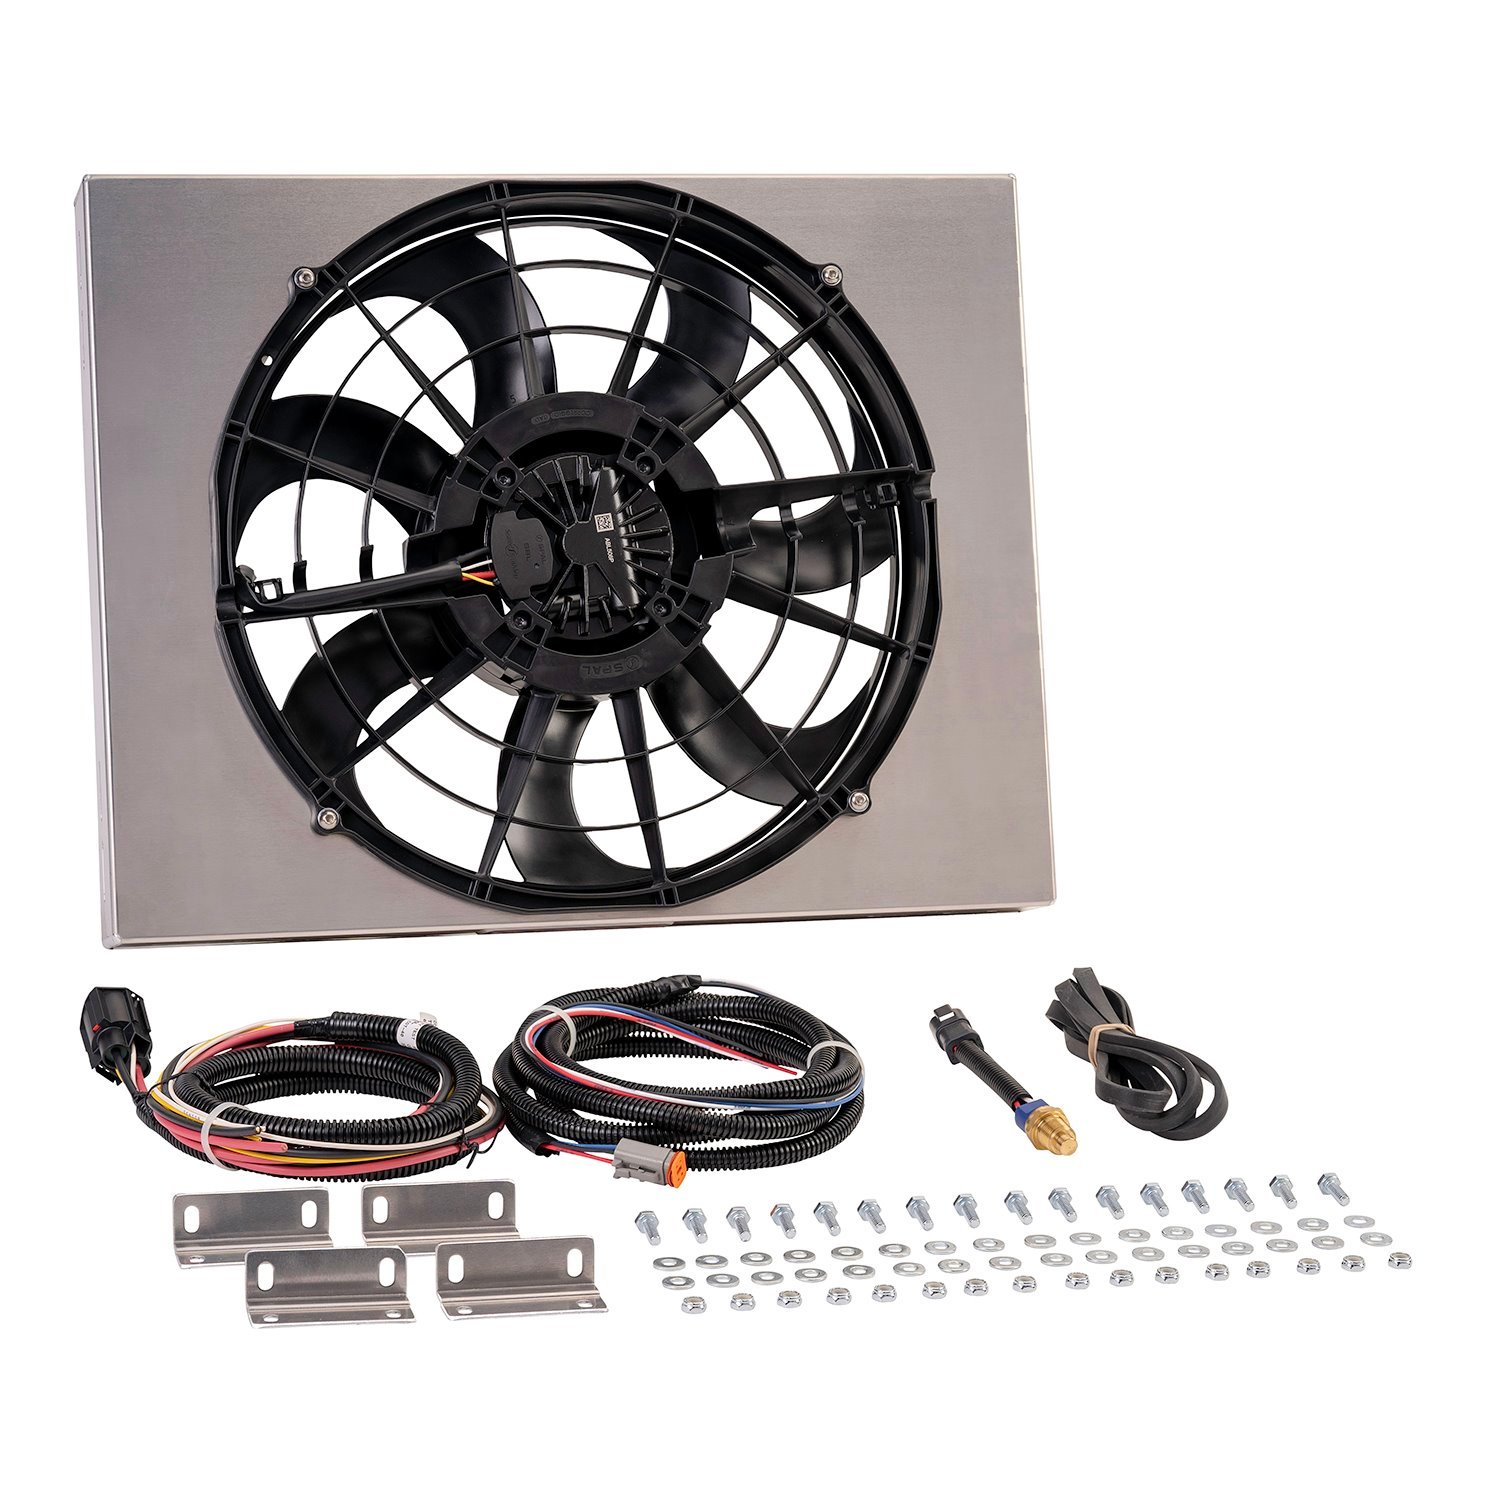 67923-185 Brushless Single Powerpack 17 in. Radiator Fan Assembly with Integrated 185 Degree PWM Controller